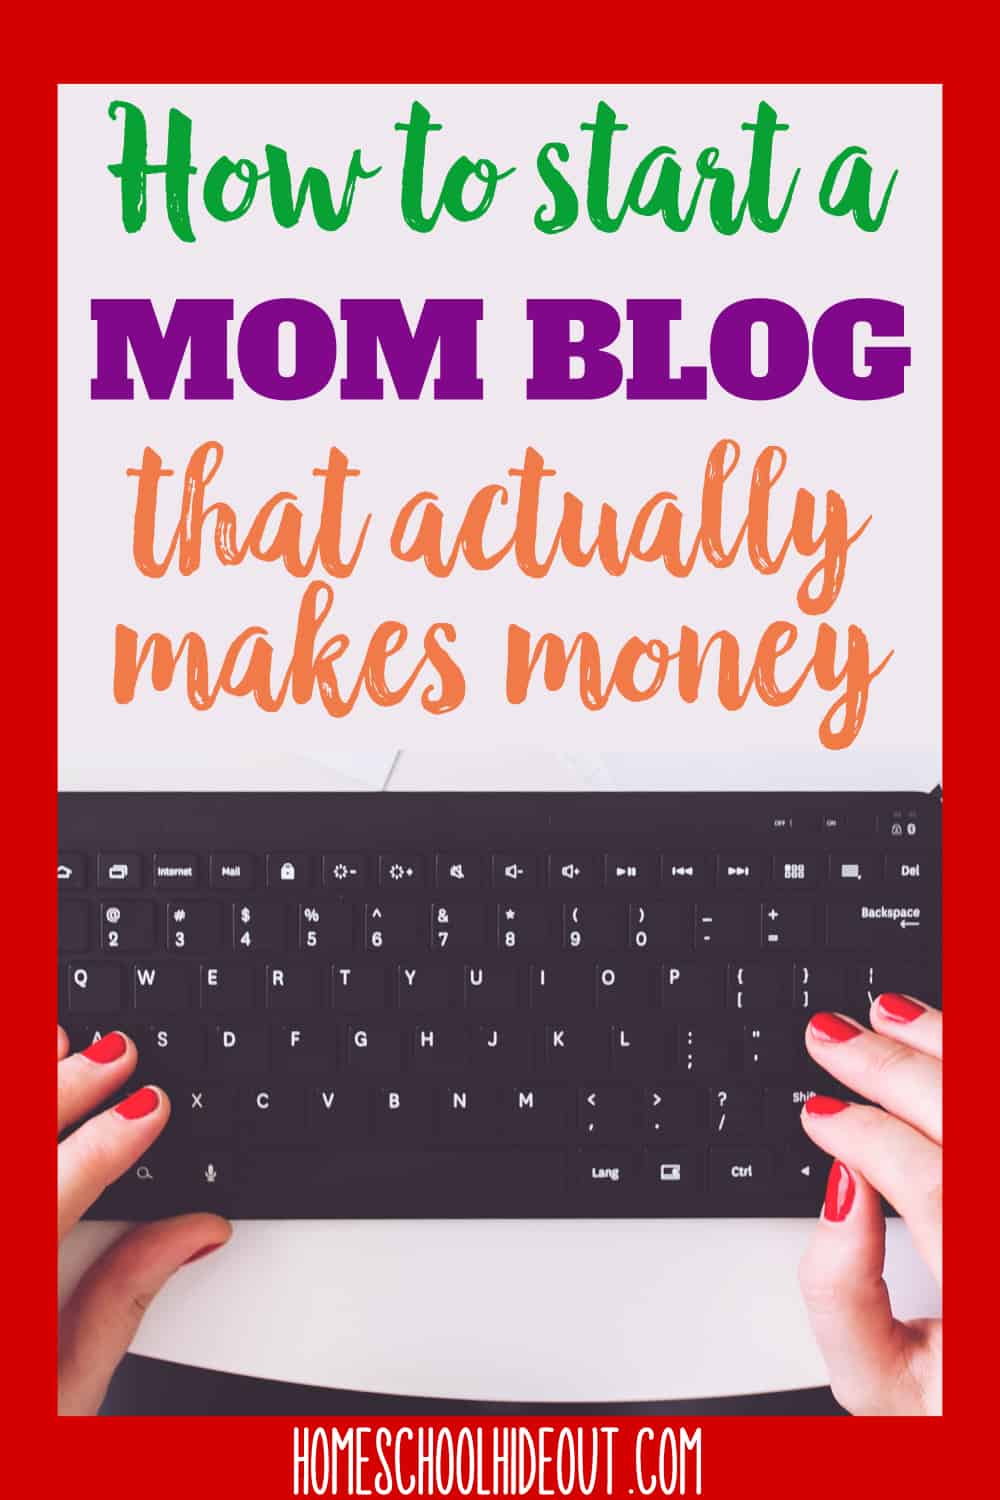 Want to start a mom blog? We've got eveything you need in just 8 simple steps! #workathome #budgeting #homeschooling #wahm #blogger #blogging #startablog